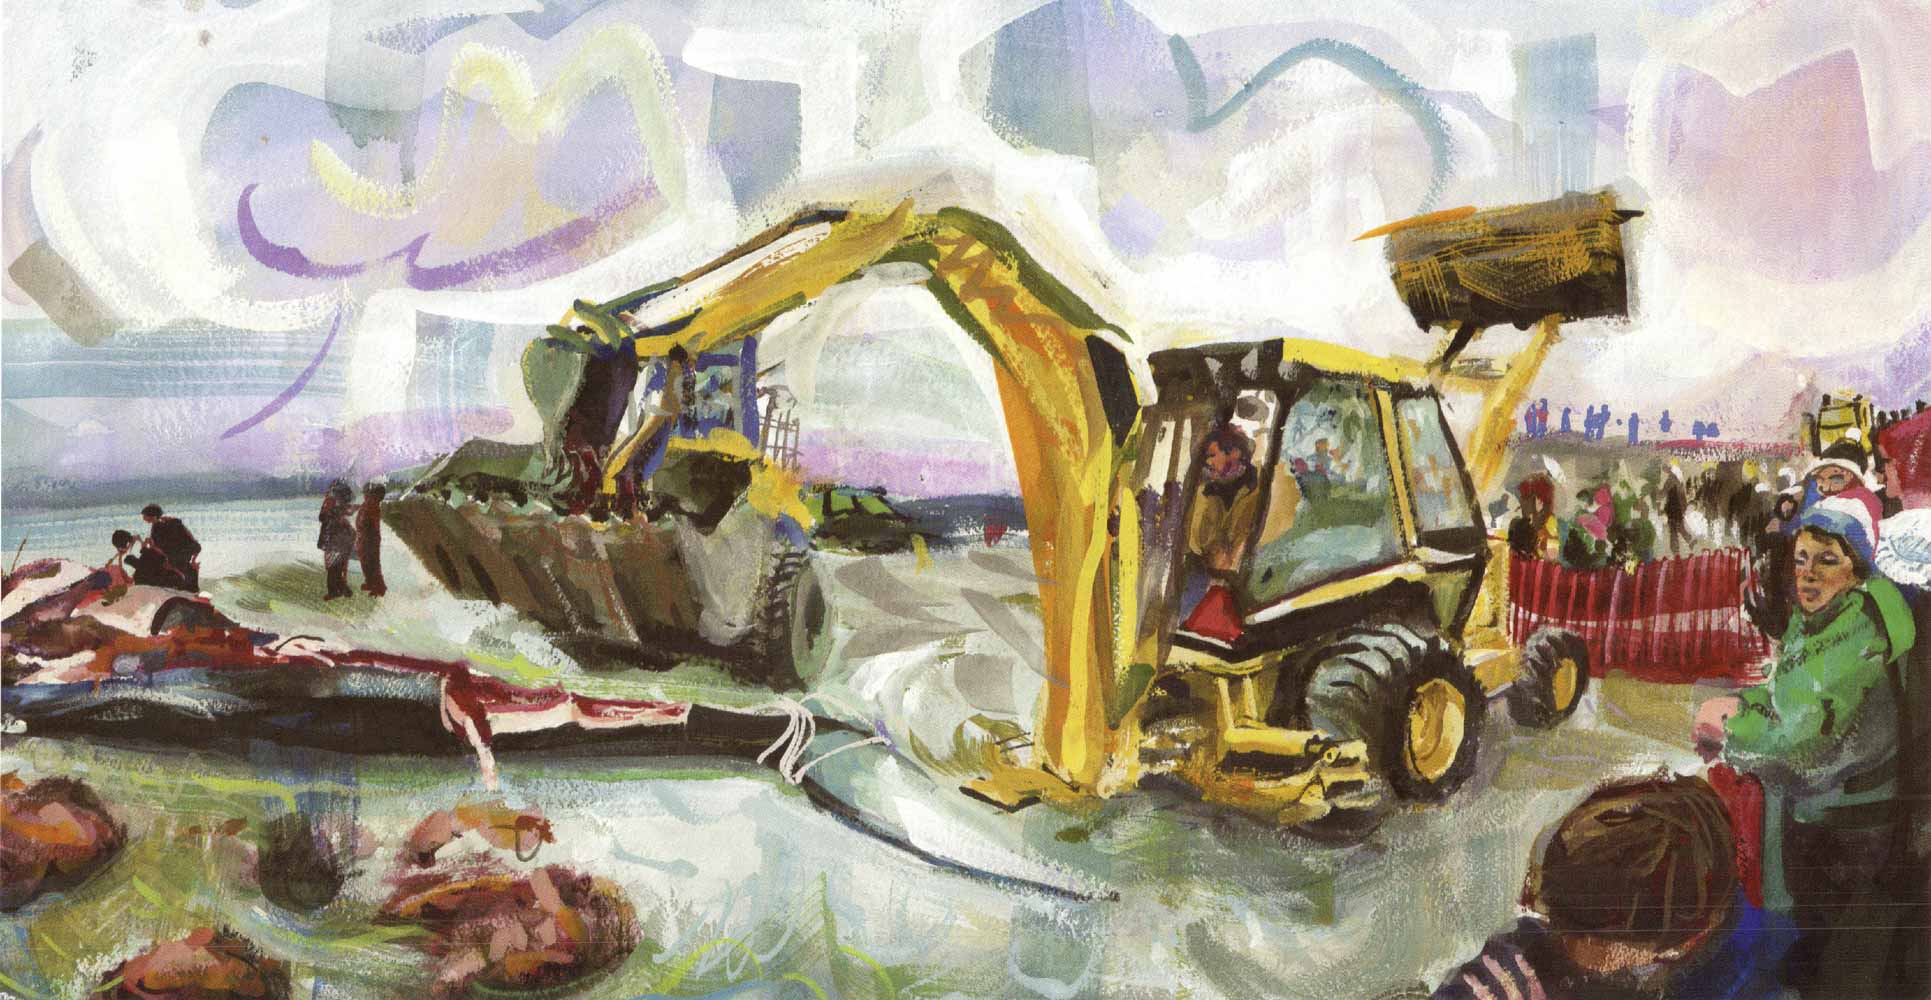 Blue whale on Second Beach, dissection with backhoe, No. 2, Winter 1998 